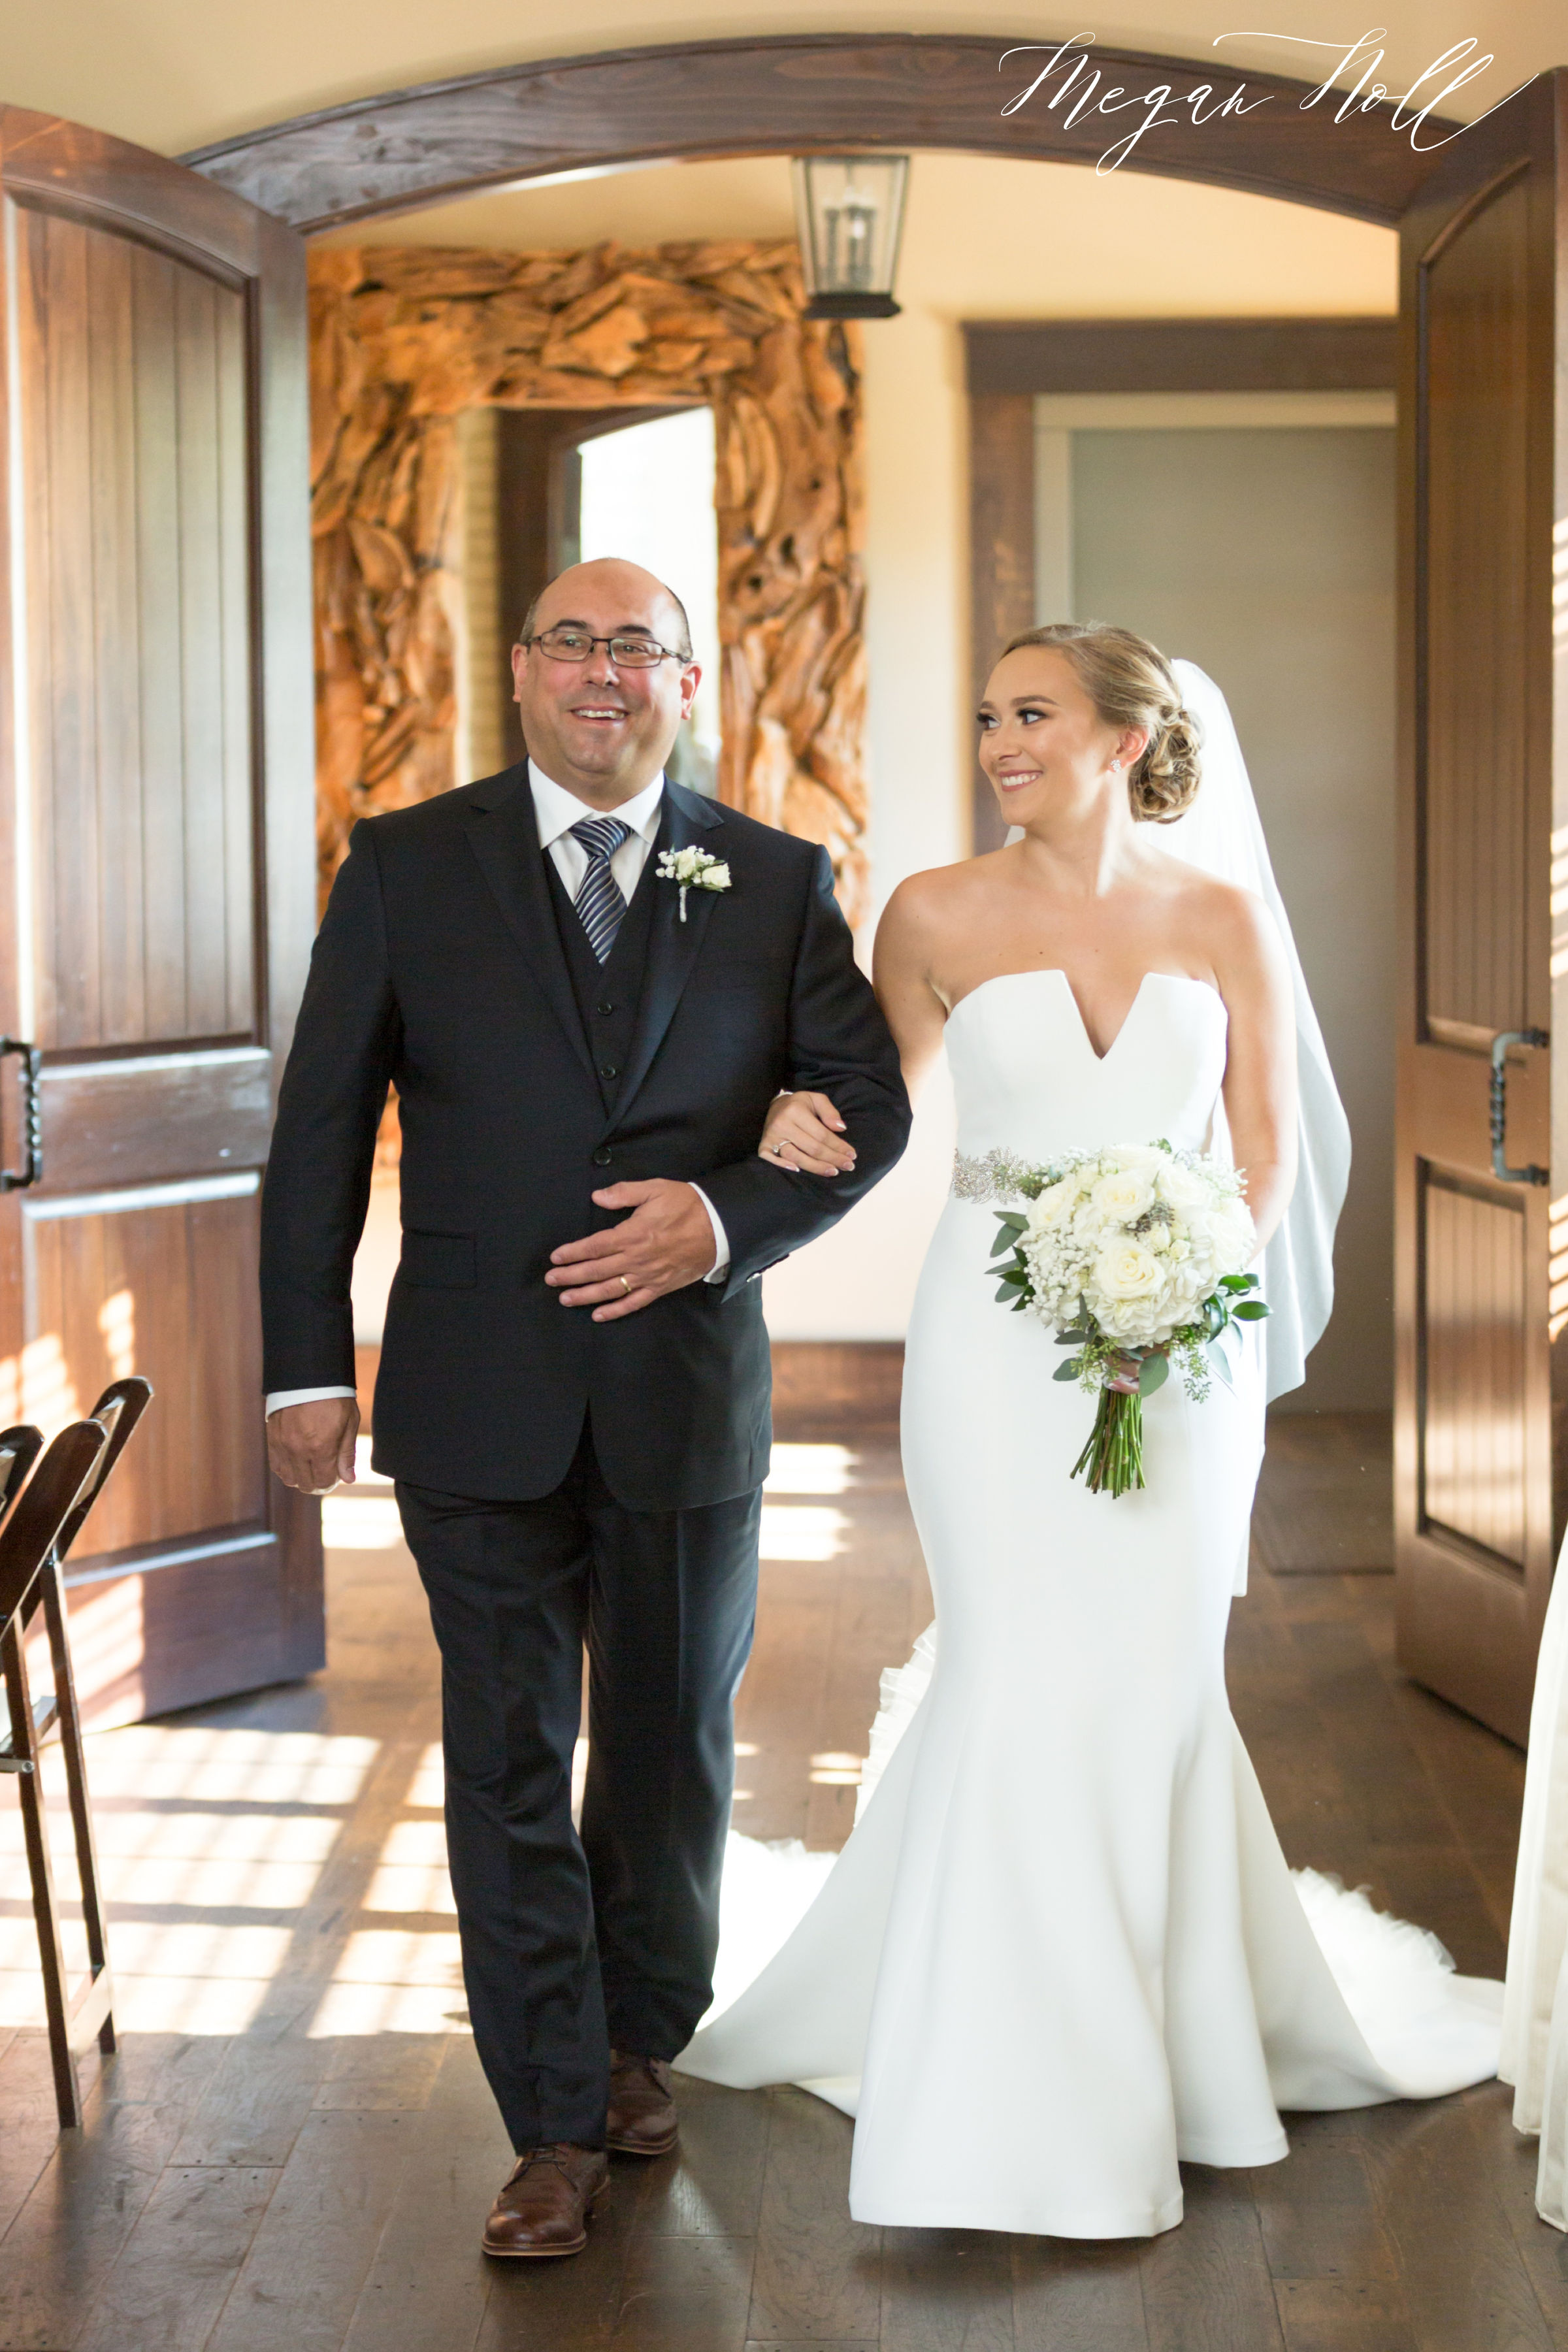 Manor House wedding with classic elements. www.megannollphotography.com